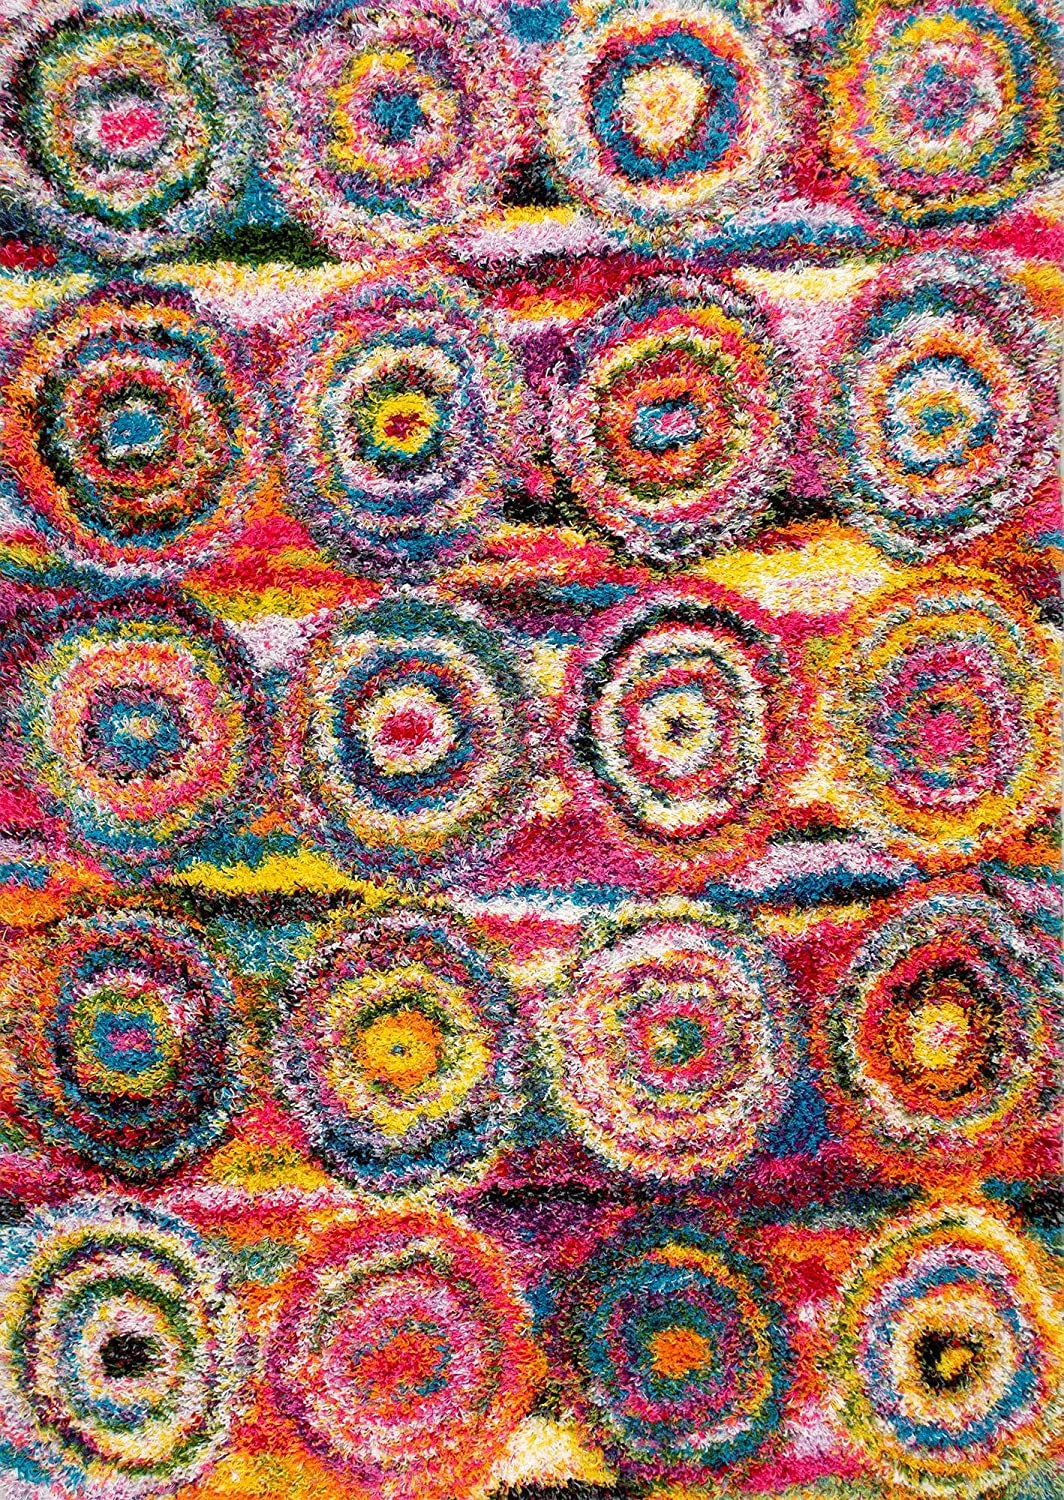 Classroom rugs can be shaggy like this one made of colorful rings of yarn.